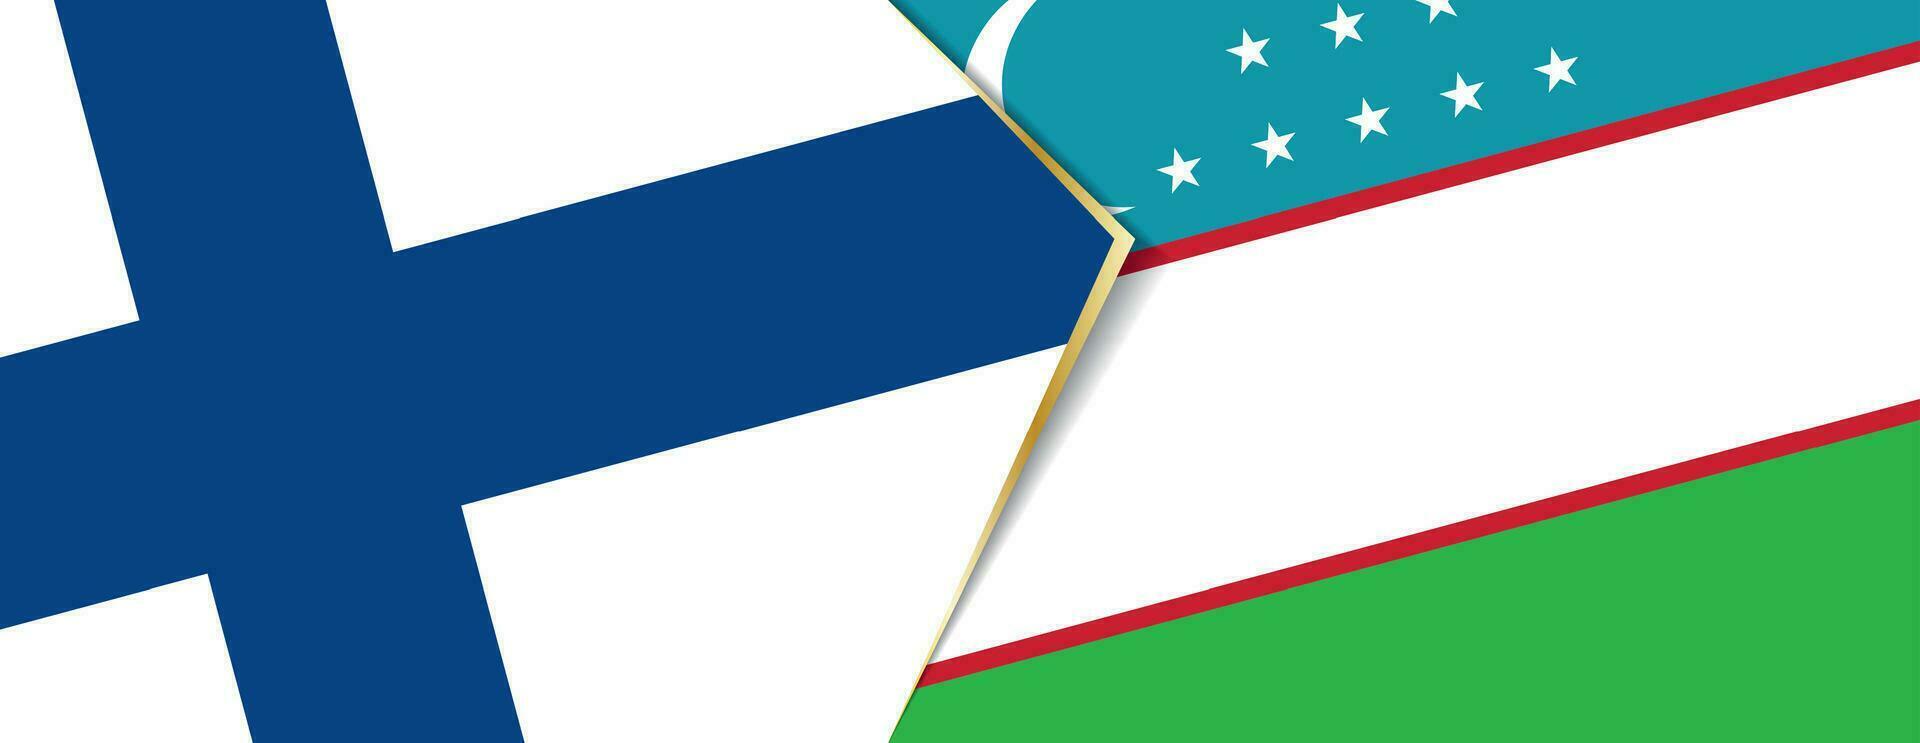 Finland and Uzbekistan flags, two vector flags.